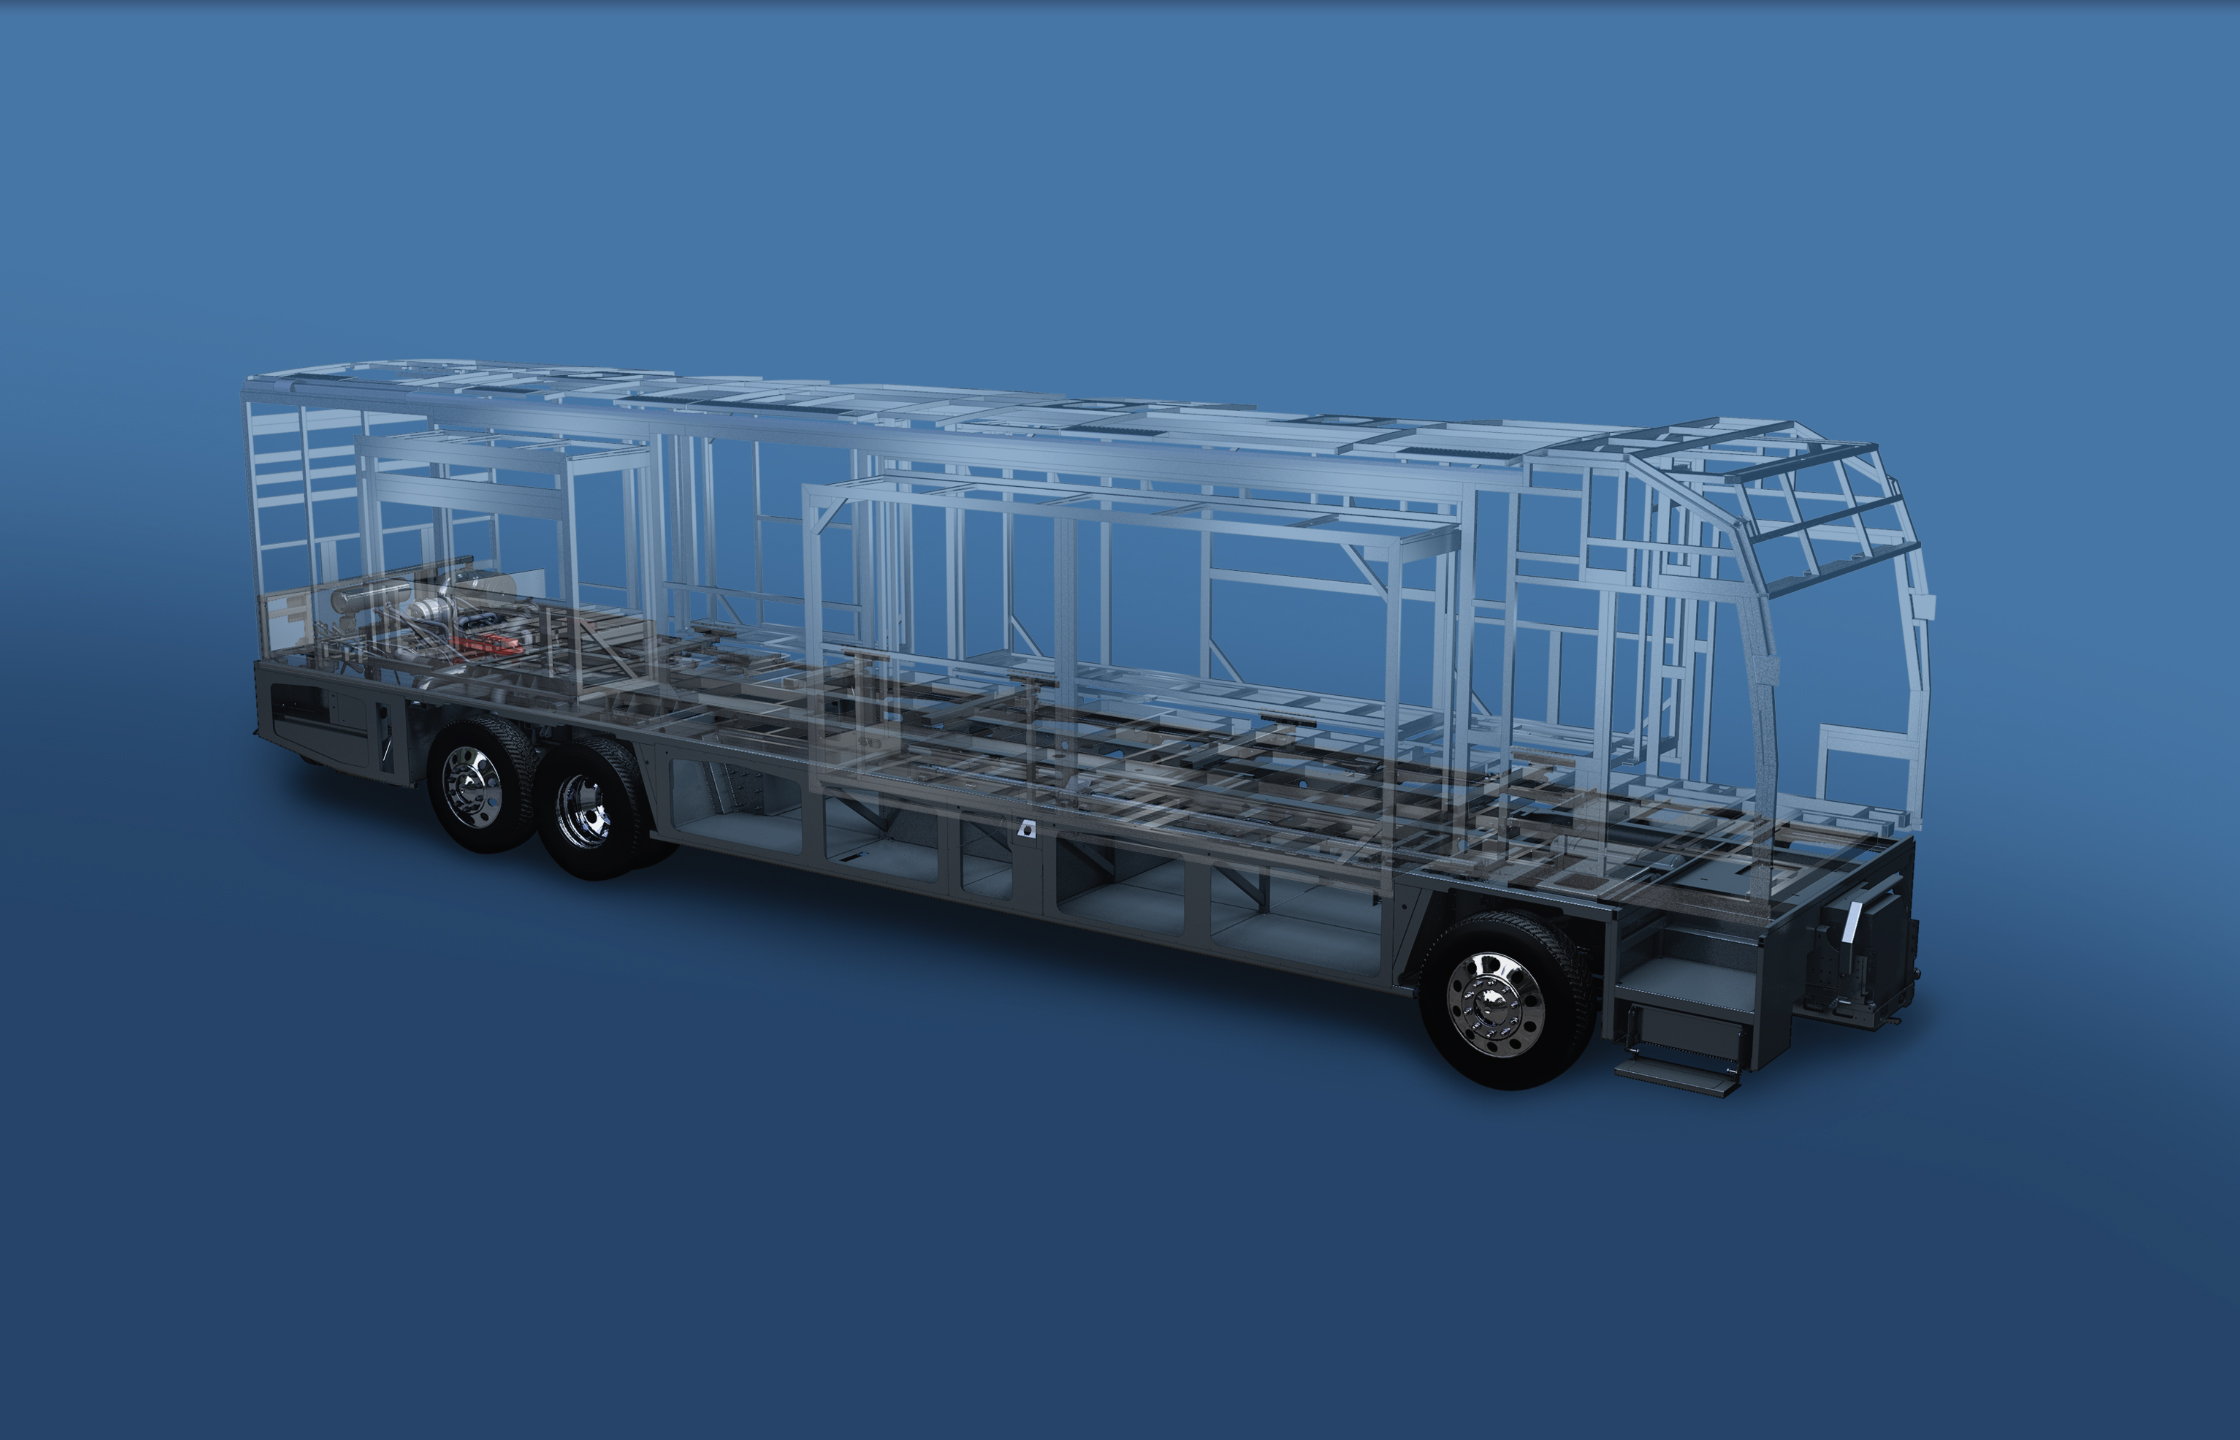 Freightliner Image 1- Blue back ground chassis and coach structure